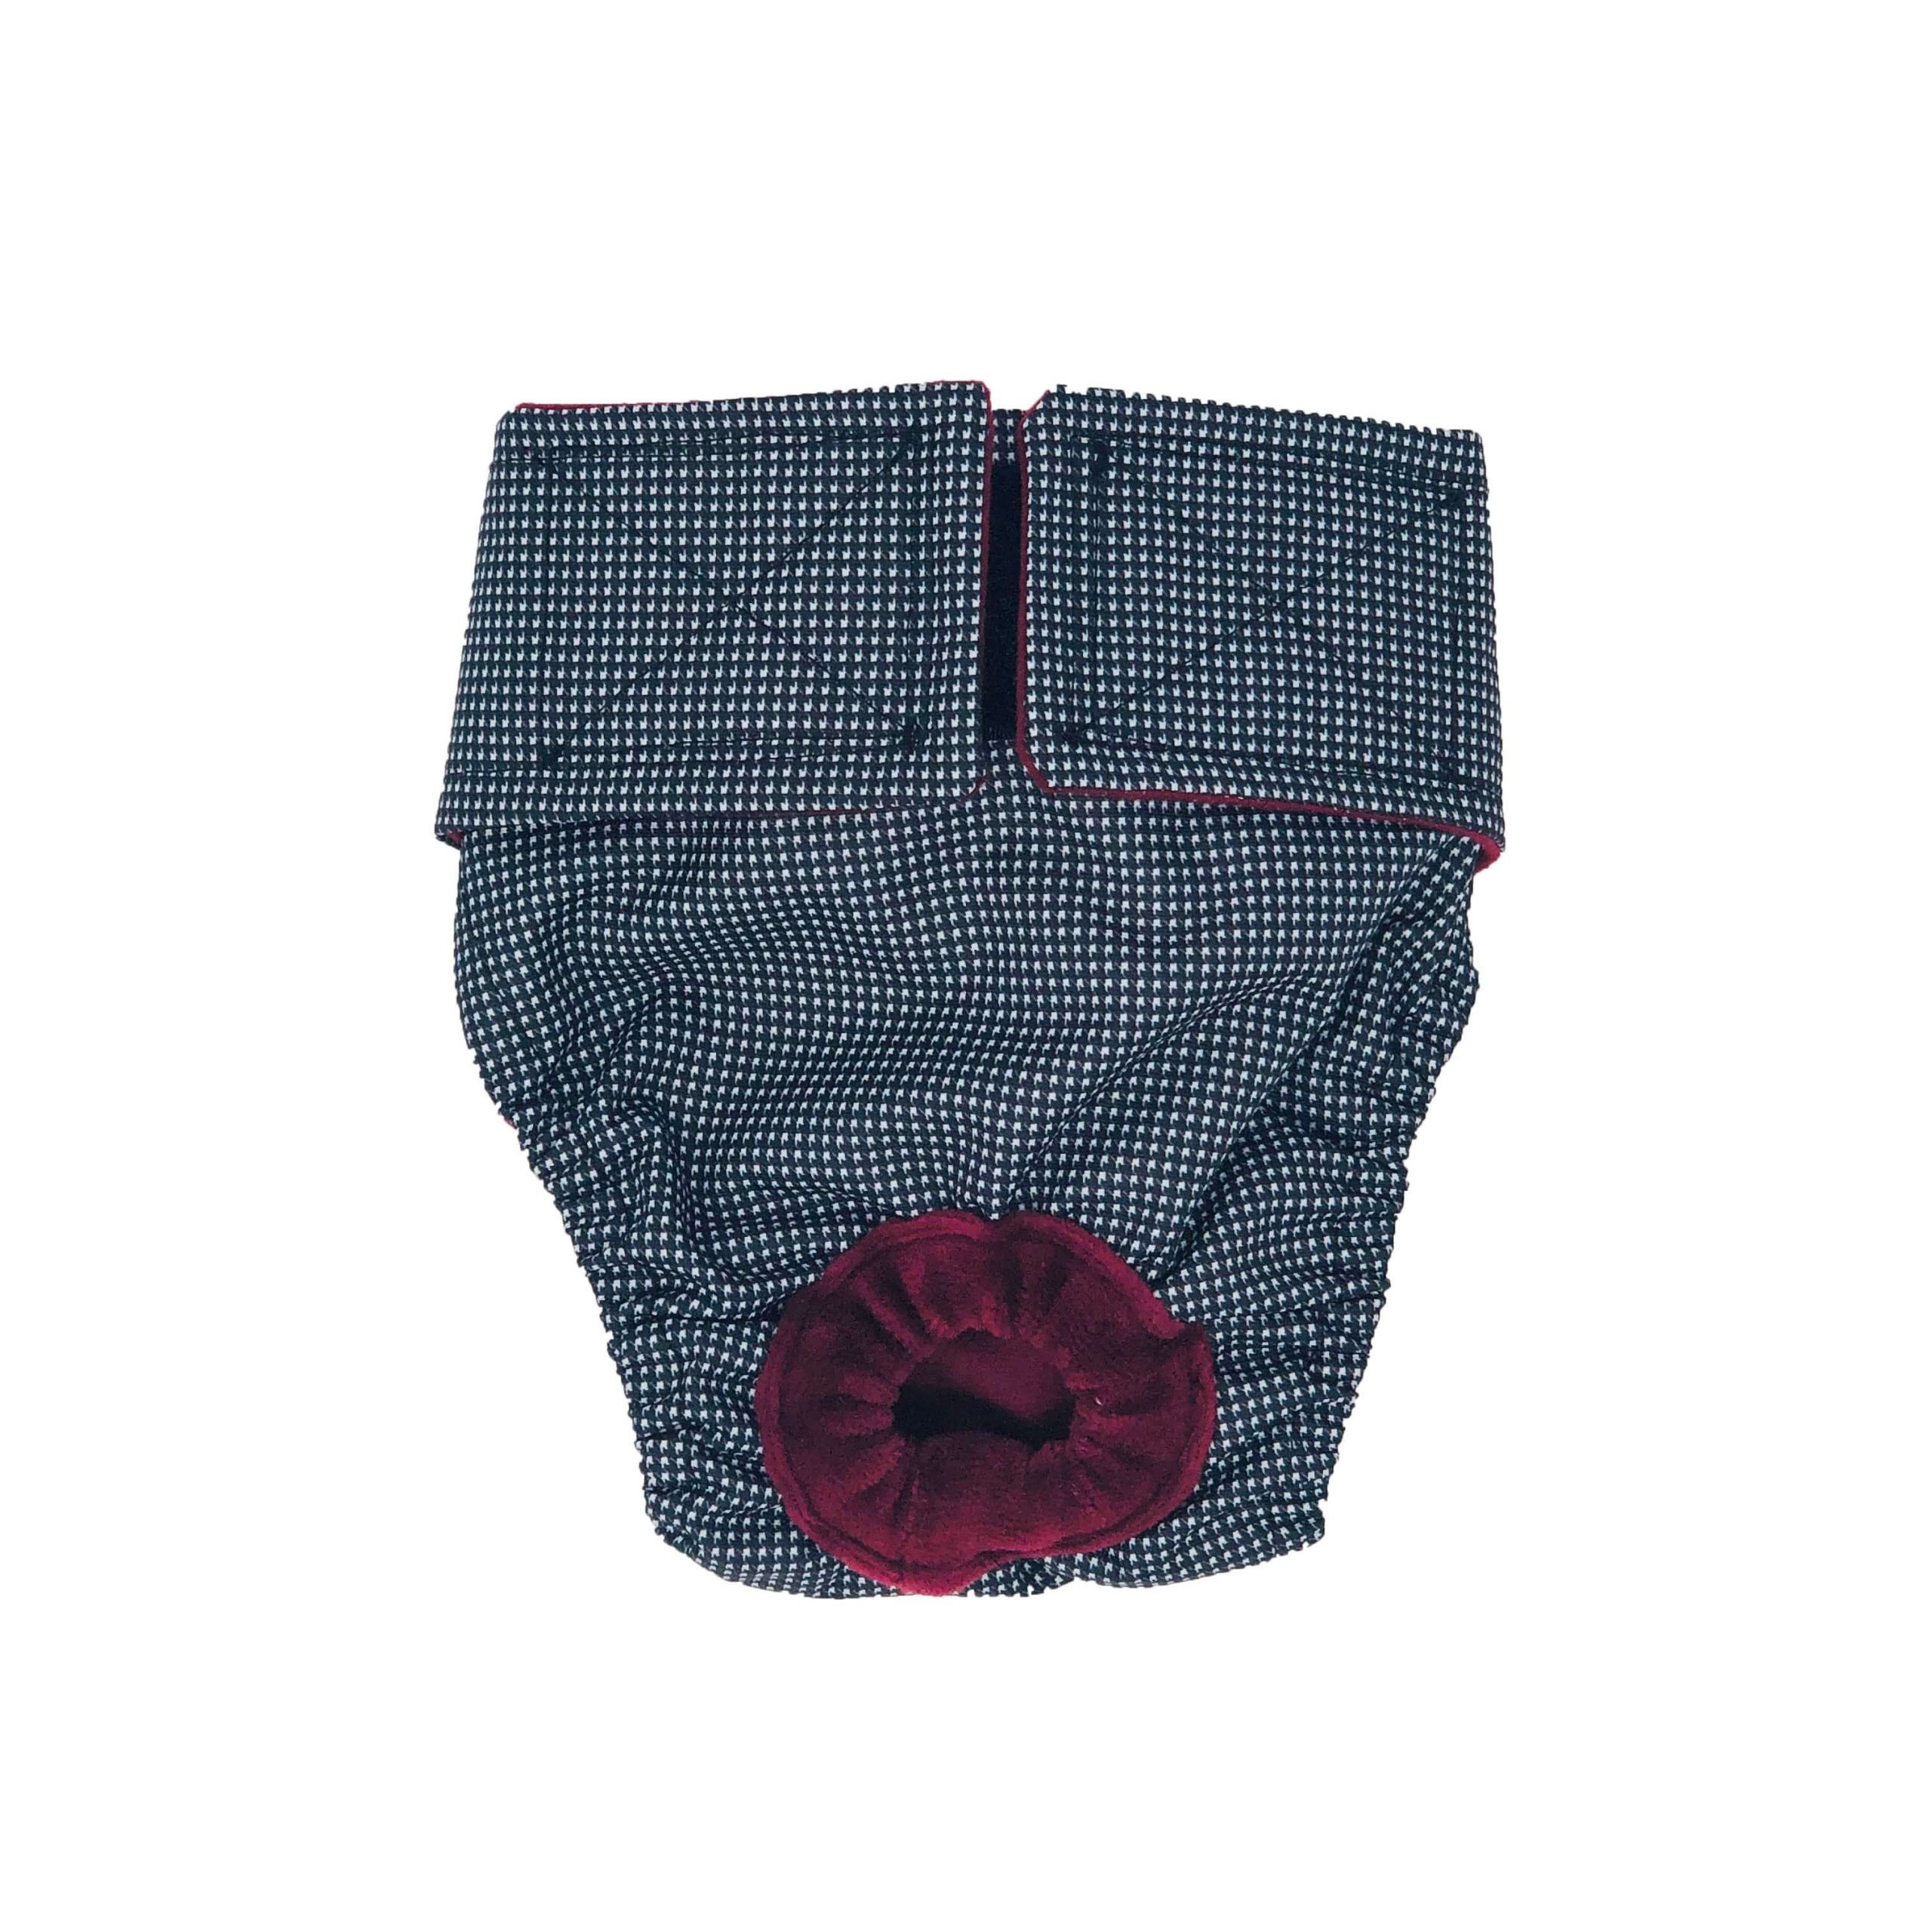 Black and White Gingham Waterproof Swim Diaper for Dogs